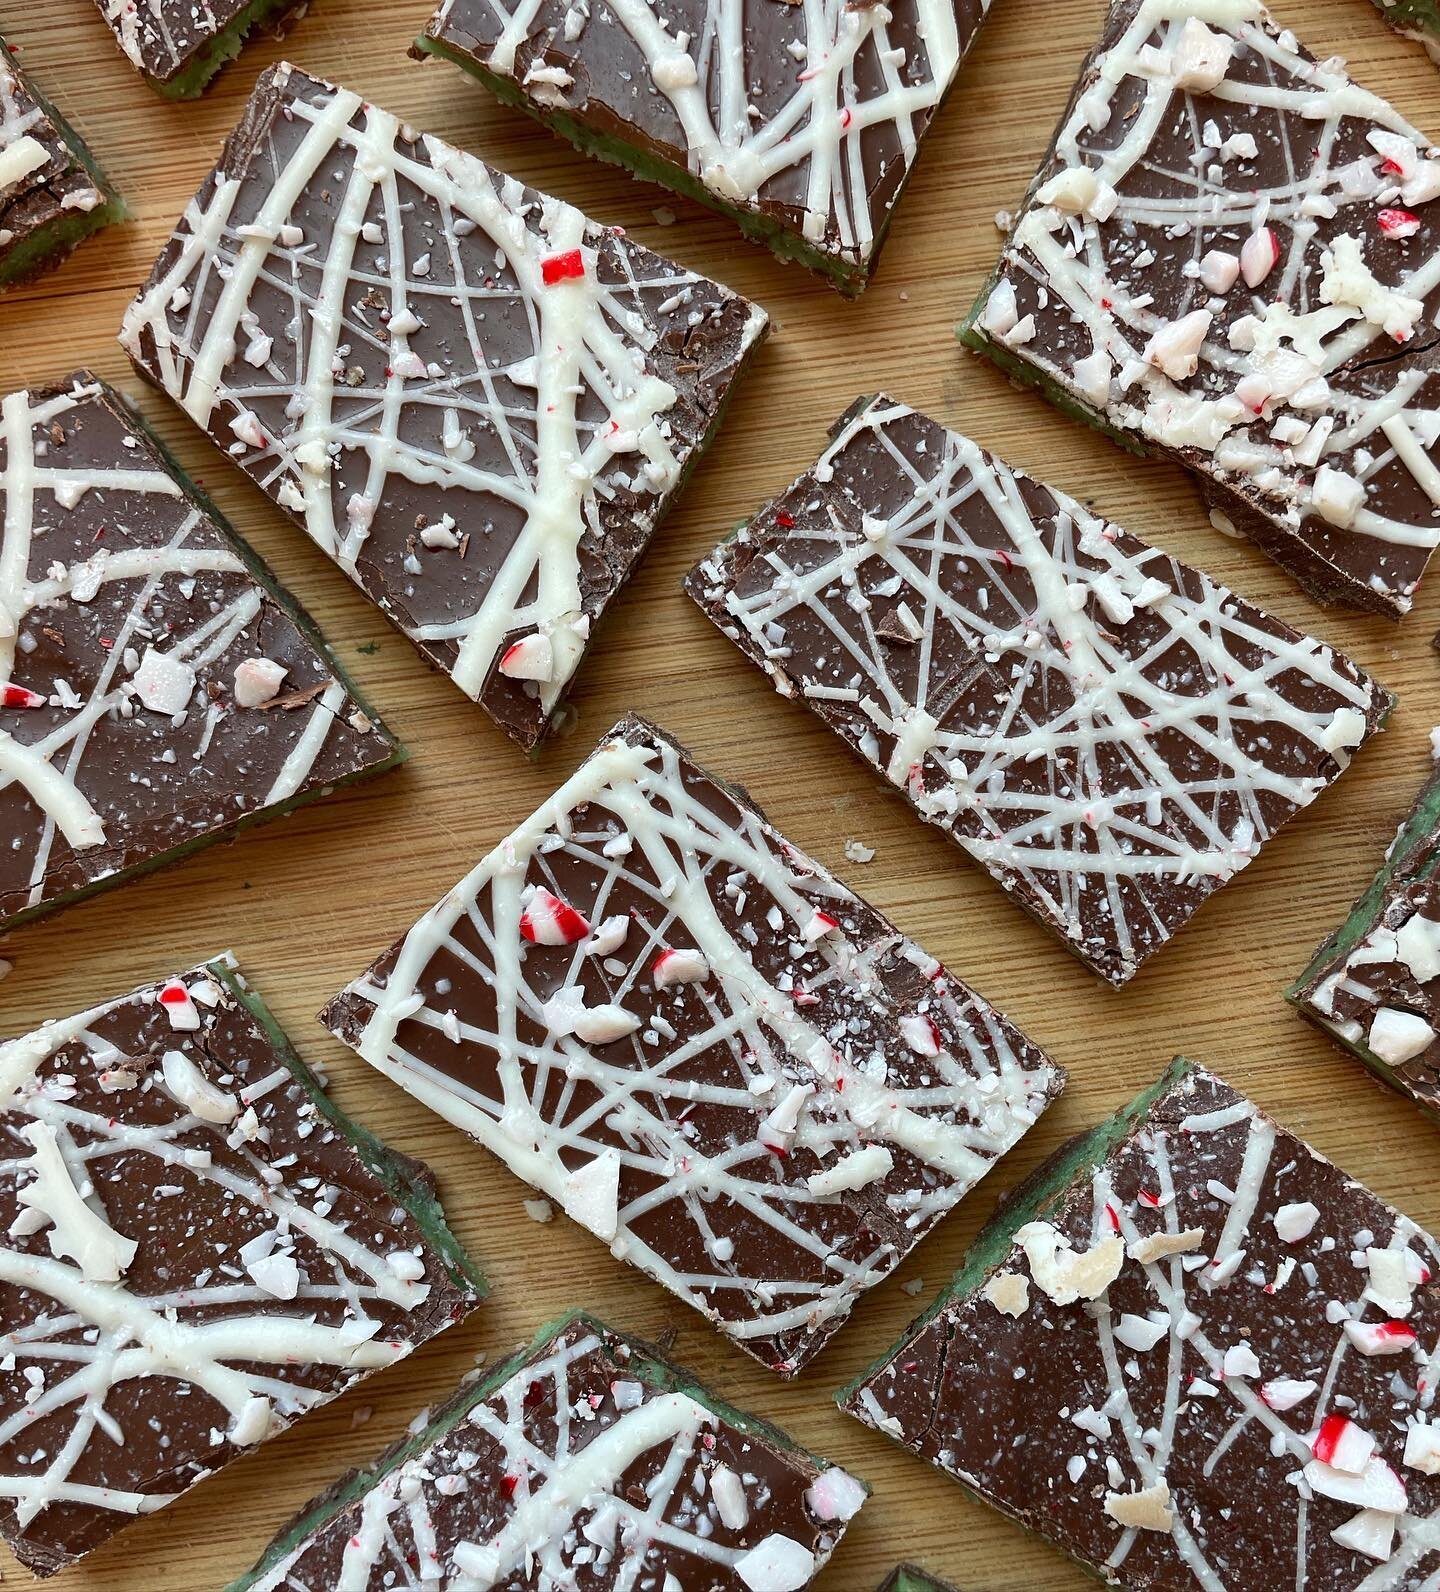 #peppermint marzipan bark in the kitchen today! 1/2 pound bags on sale for $14 ❤️

#peppermintbark #mint #chocolatebark #chocolate #yummy #nomnomnom #sweets #sweet #sweetsofig #sweetsofinstagram #treats #whitechocolate #marzipan